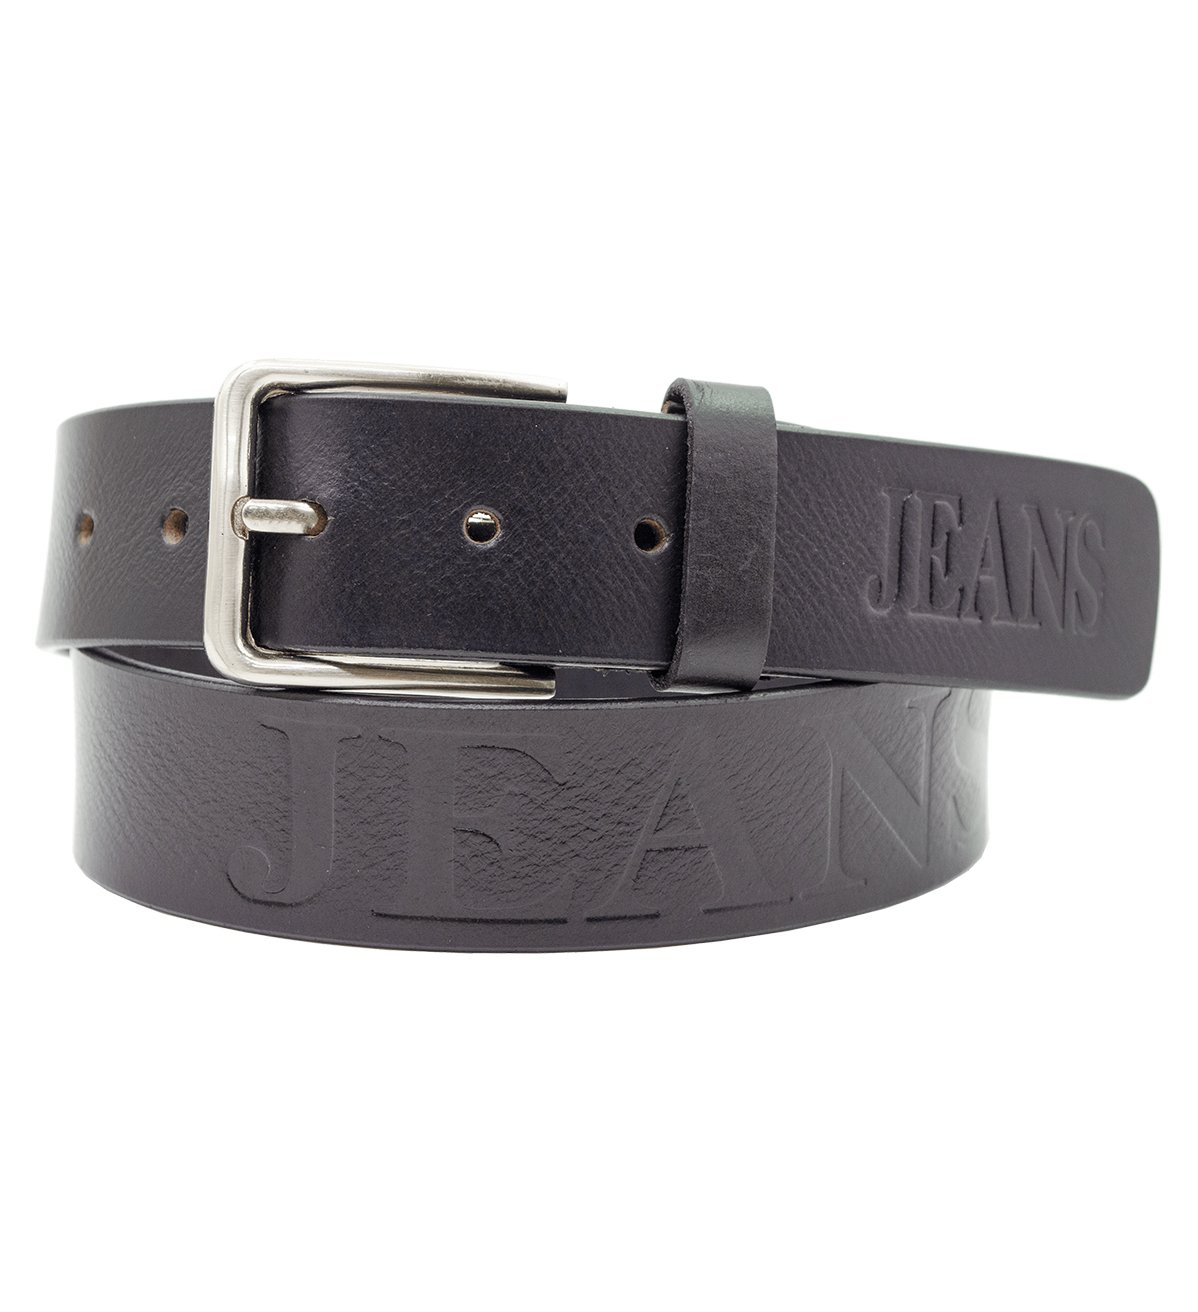 Men's Jeans Printed Leather Belt with Heavy Silver Buckle - #BT-1631